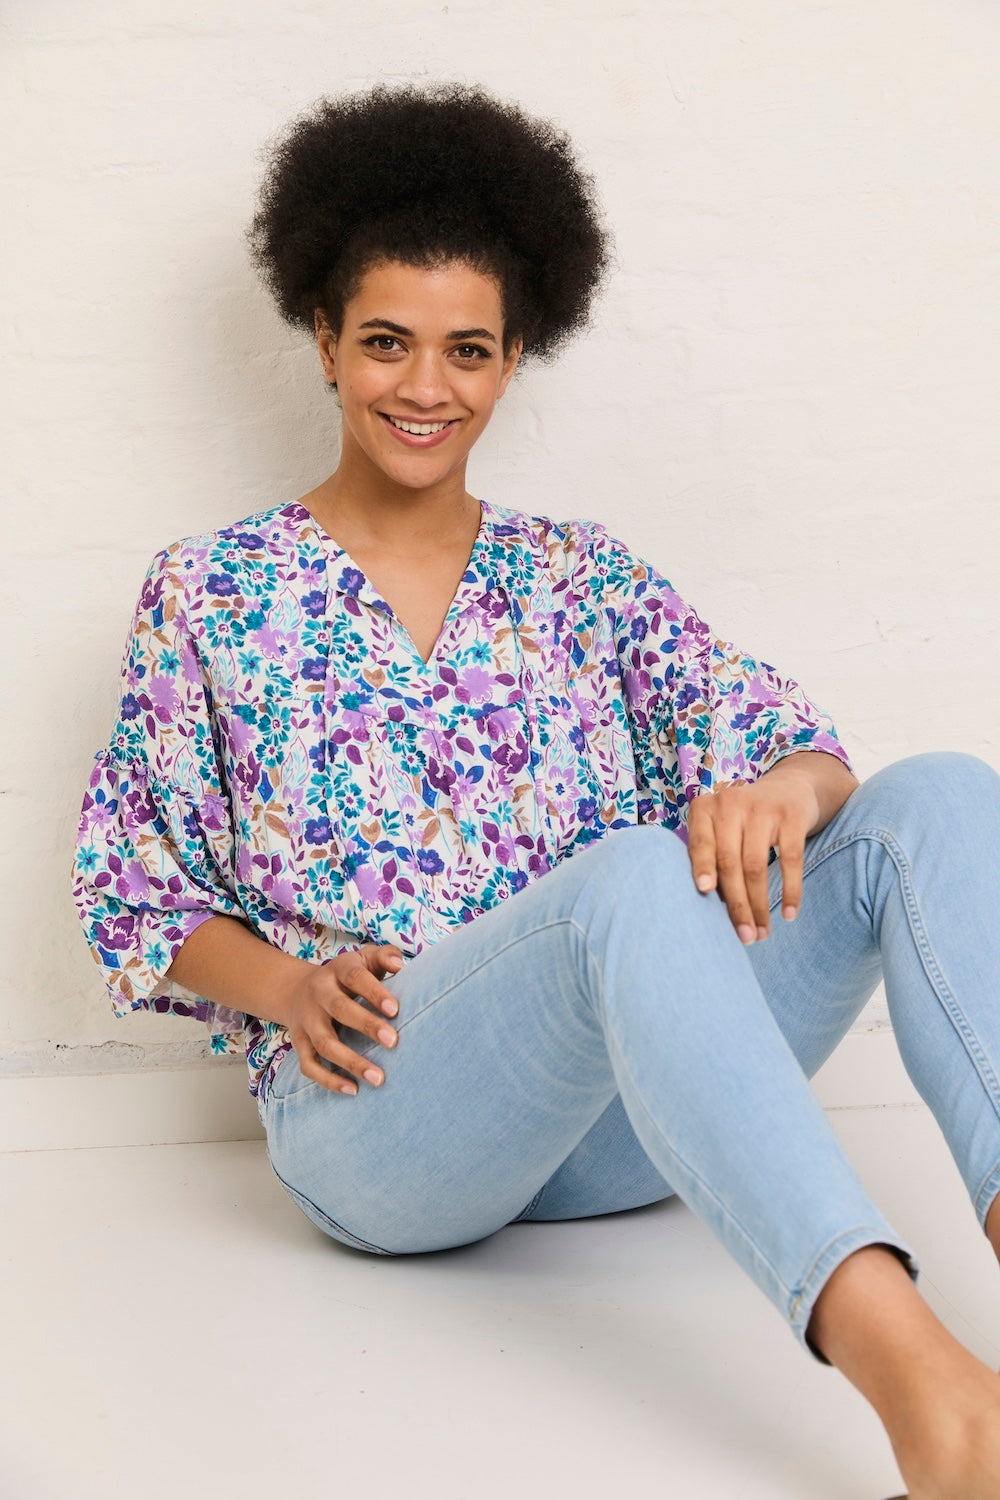 Woman wearing the Hannah Blouse sewing pattern from Atelier Jupe on The Fold Line. A blouse pattern made in viscose, cotton, tencel, linen, or double gauze fabric, featuring a relaxed fit, gathered bodice, wide gathered sleeves, and ties at the neckline.